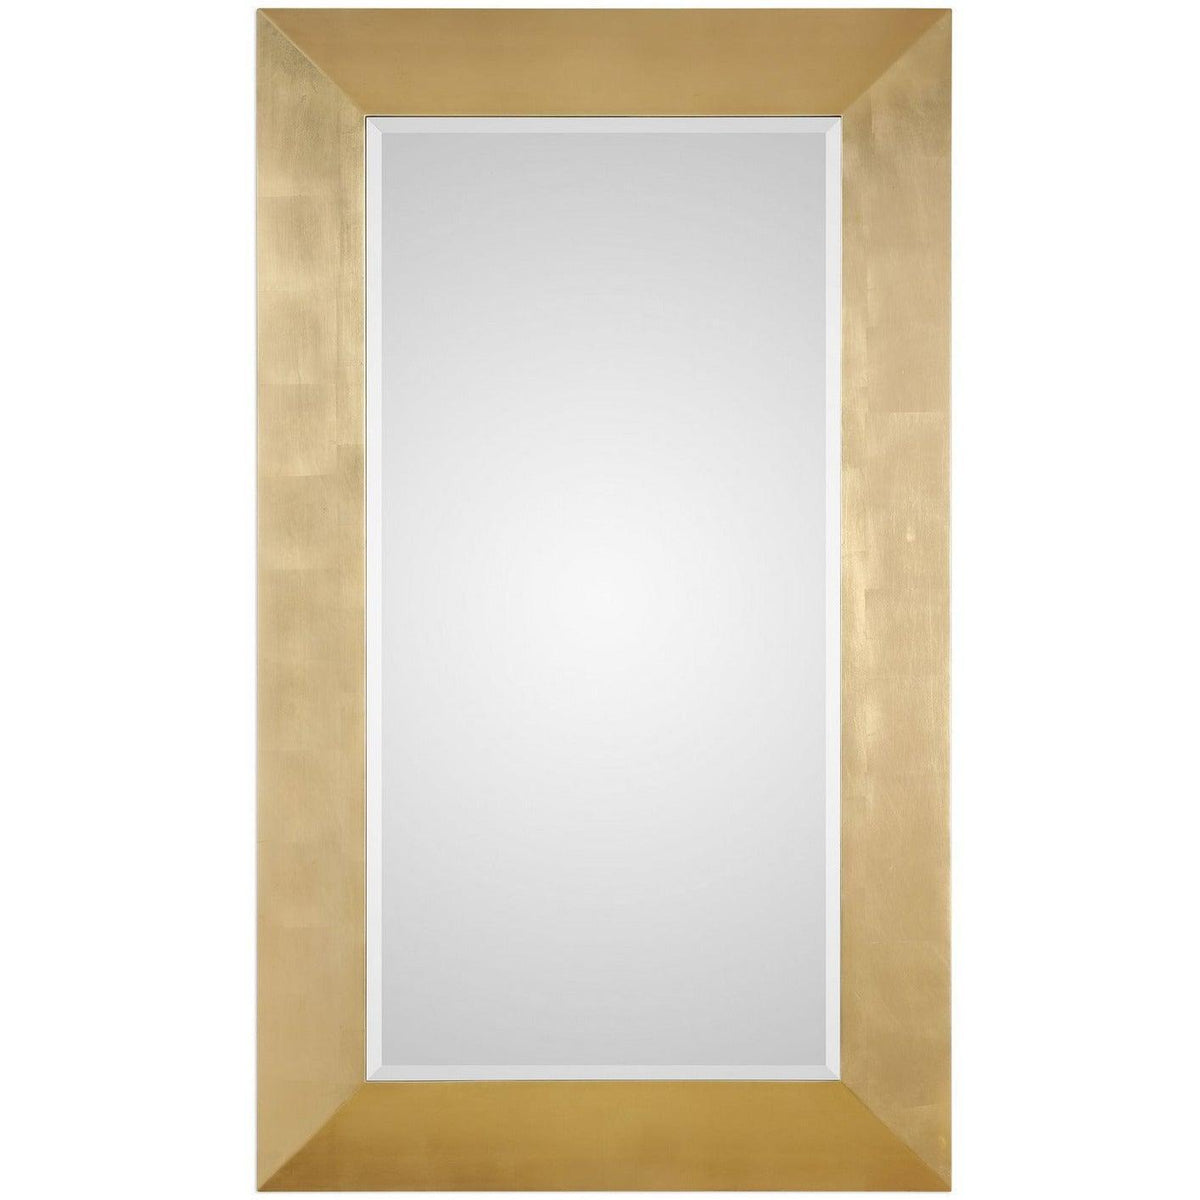 The Uttermost - Chaney Mirror - 09324 | Montreal Lighting & Hardware